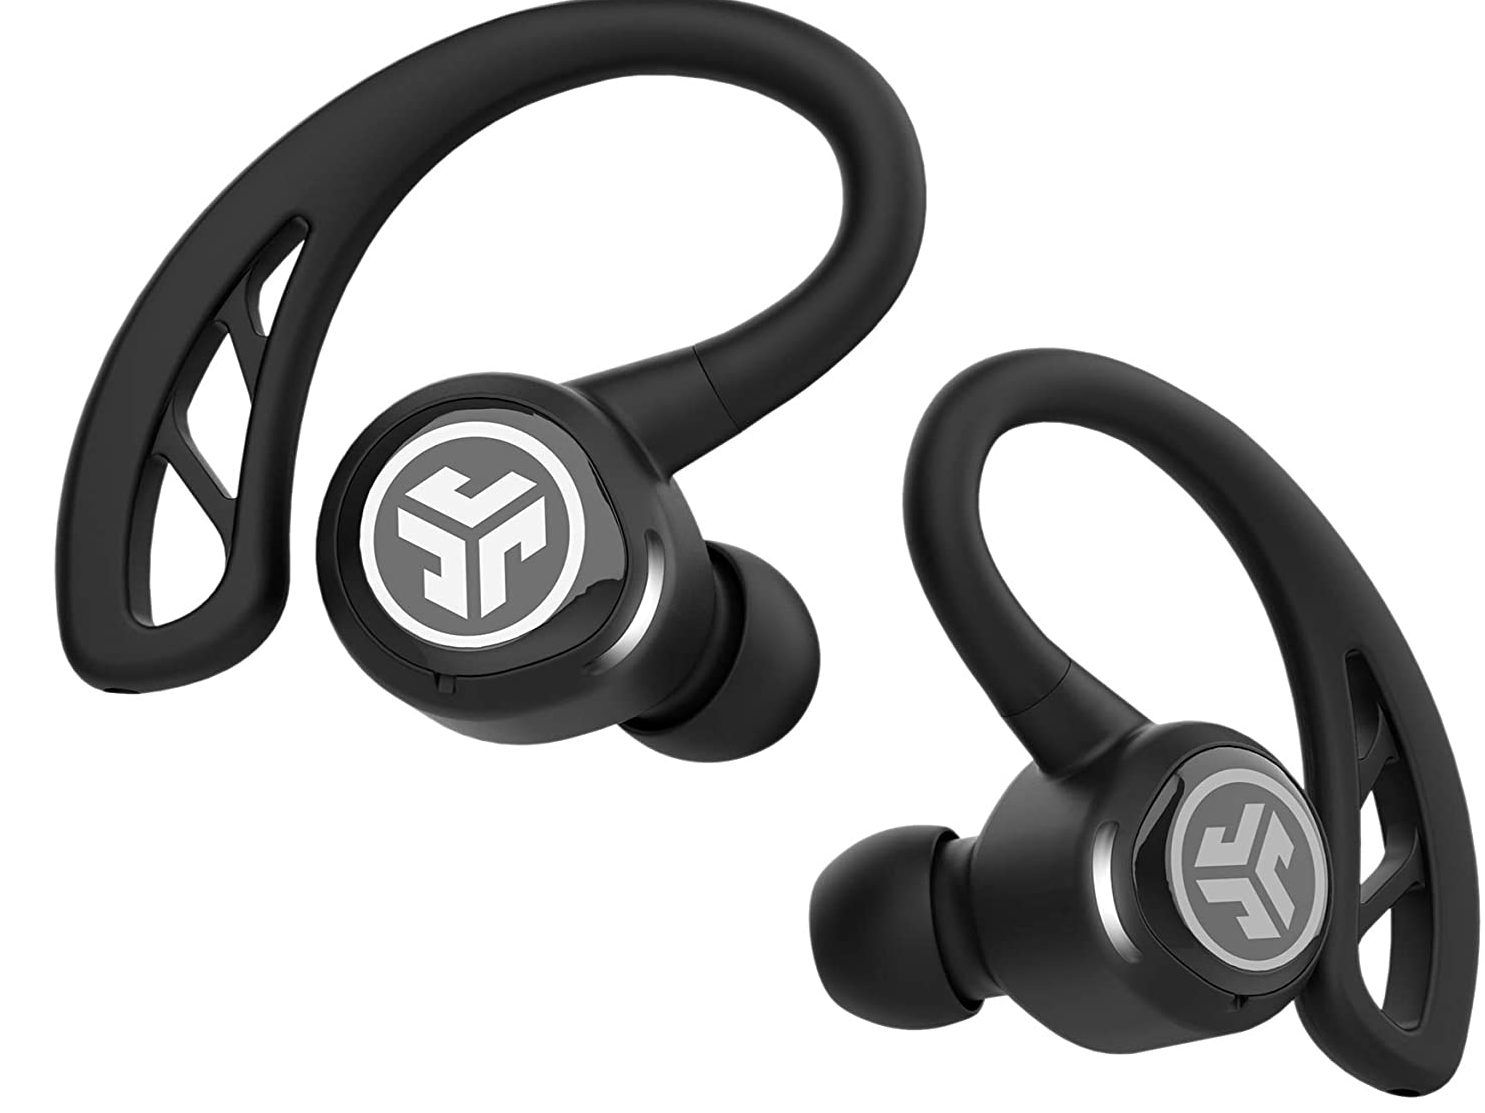 Best Wireless Earbuds for Working Out (Updated 2021)